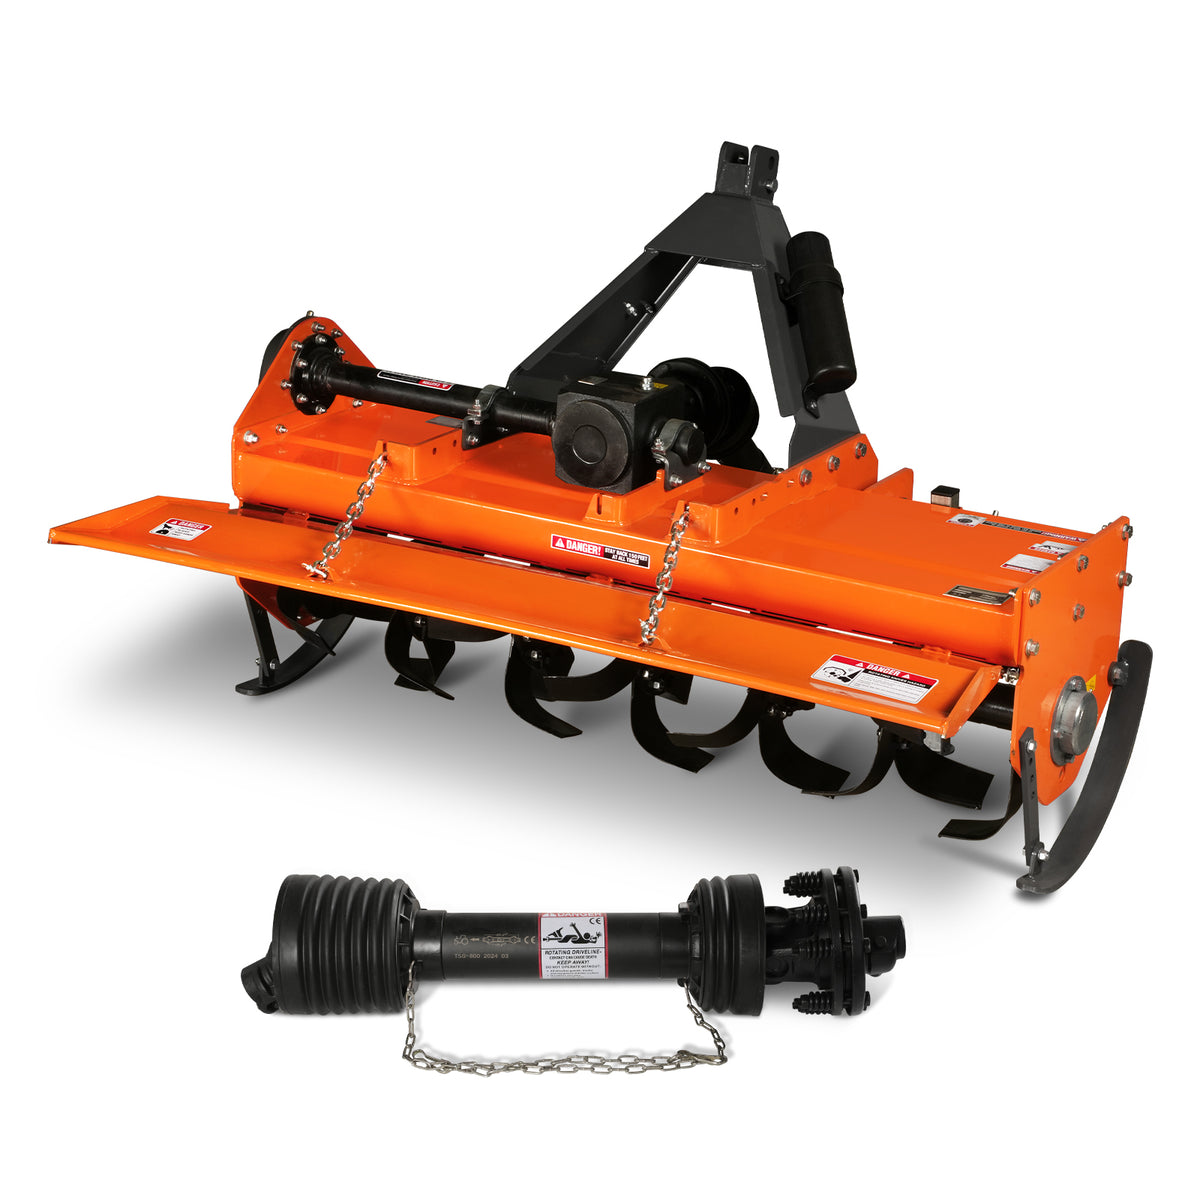 5FT 3-Point Gear Drive Rotary Tiller, 25-50HP Tractor, PTO Shaft Included (With Slip Clutch), Cat. 1 &2 Hookup